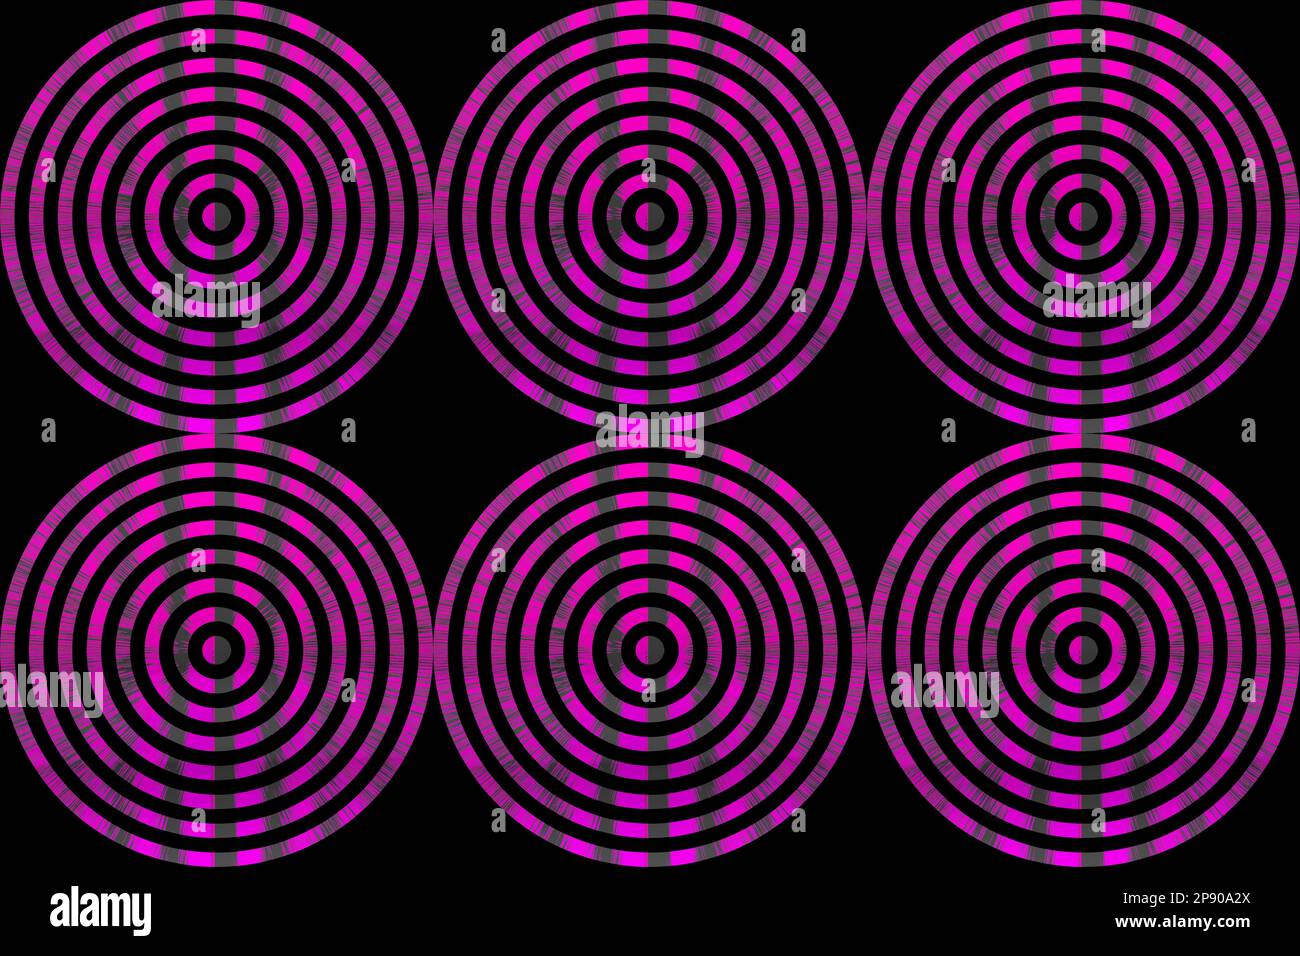 Pink circles with sun rays texture on black background, print pattern Stock Photo